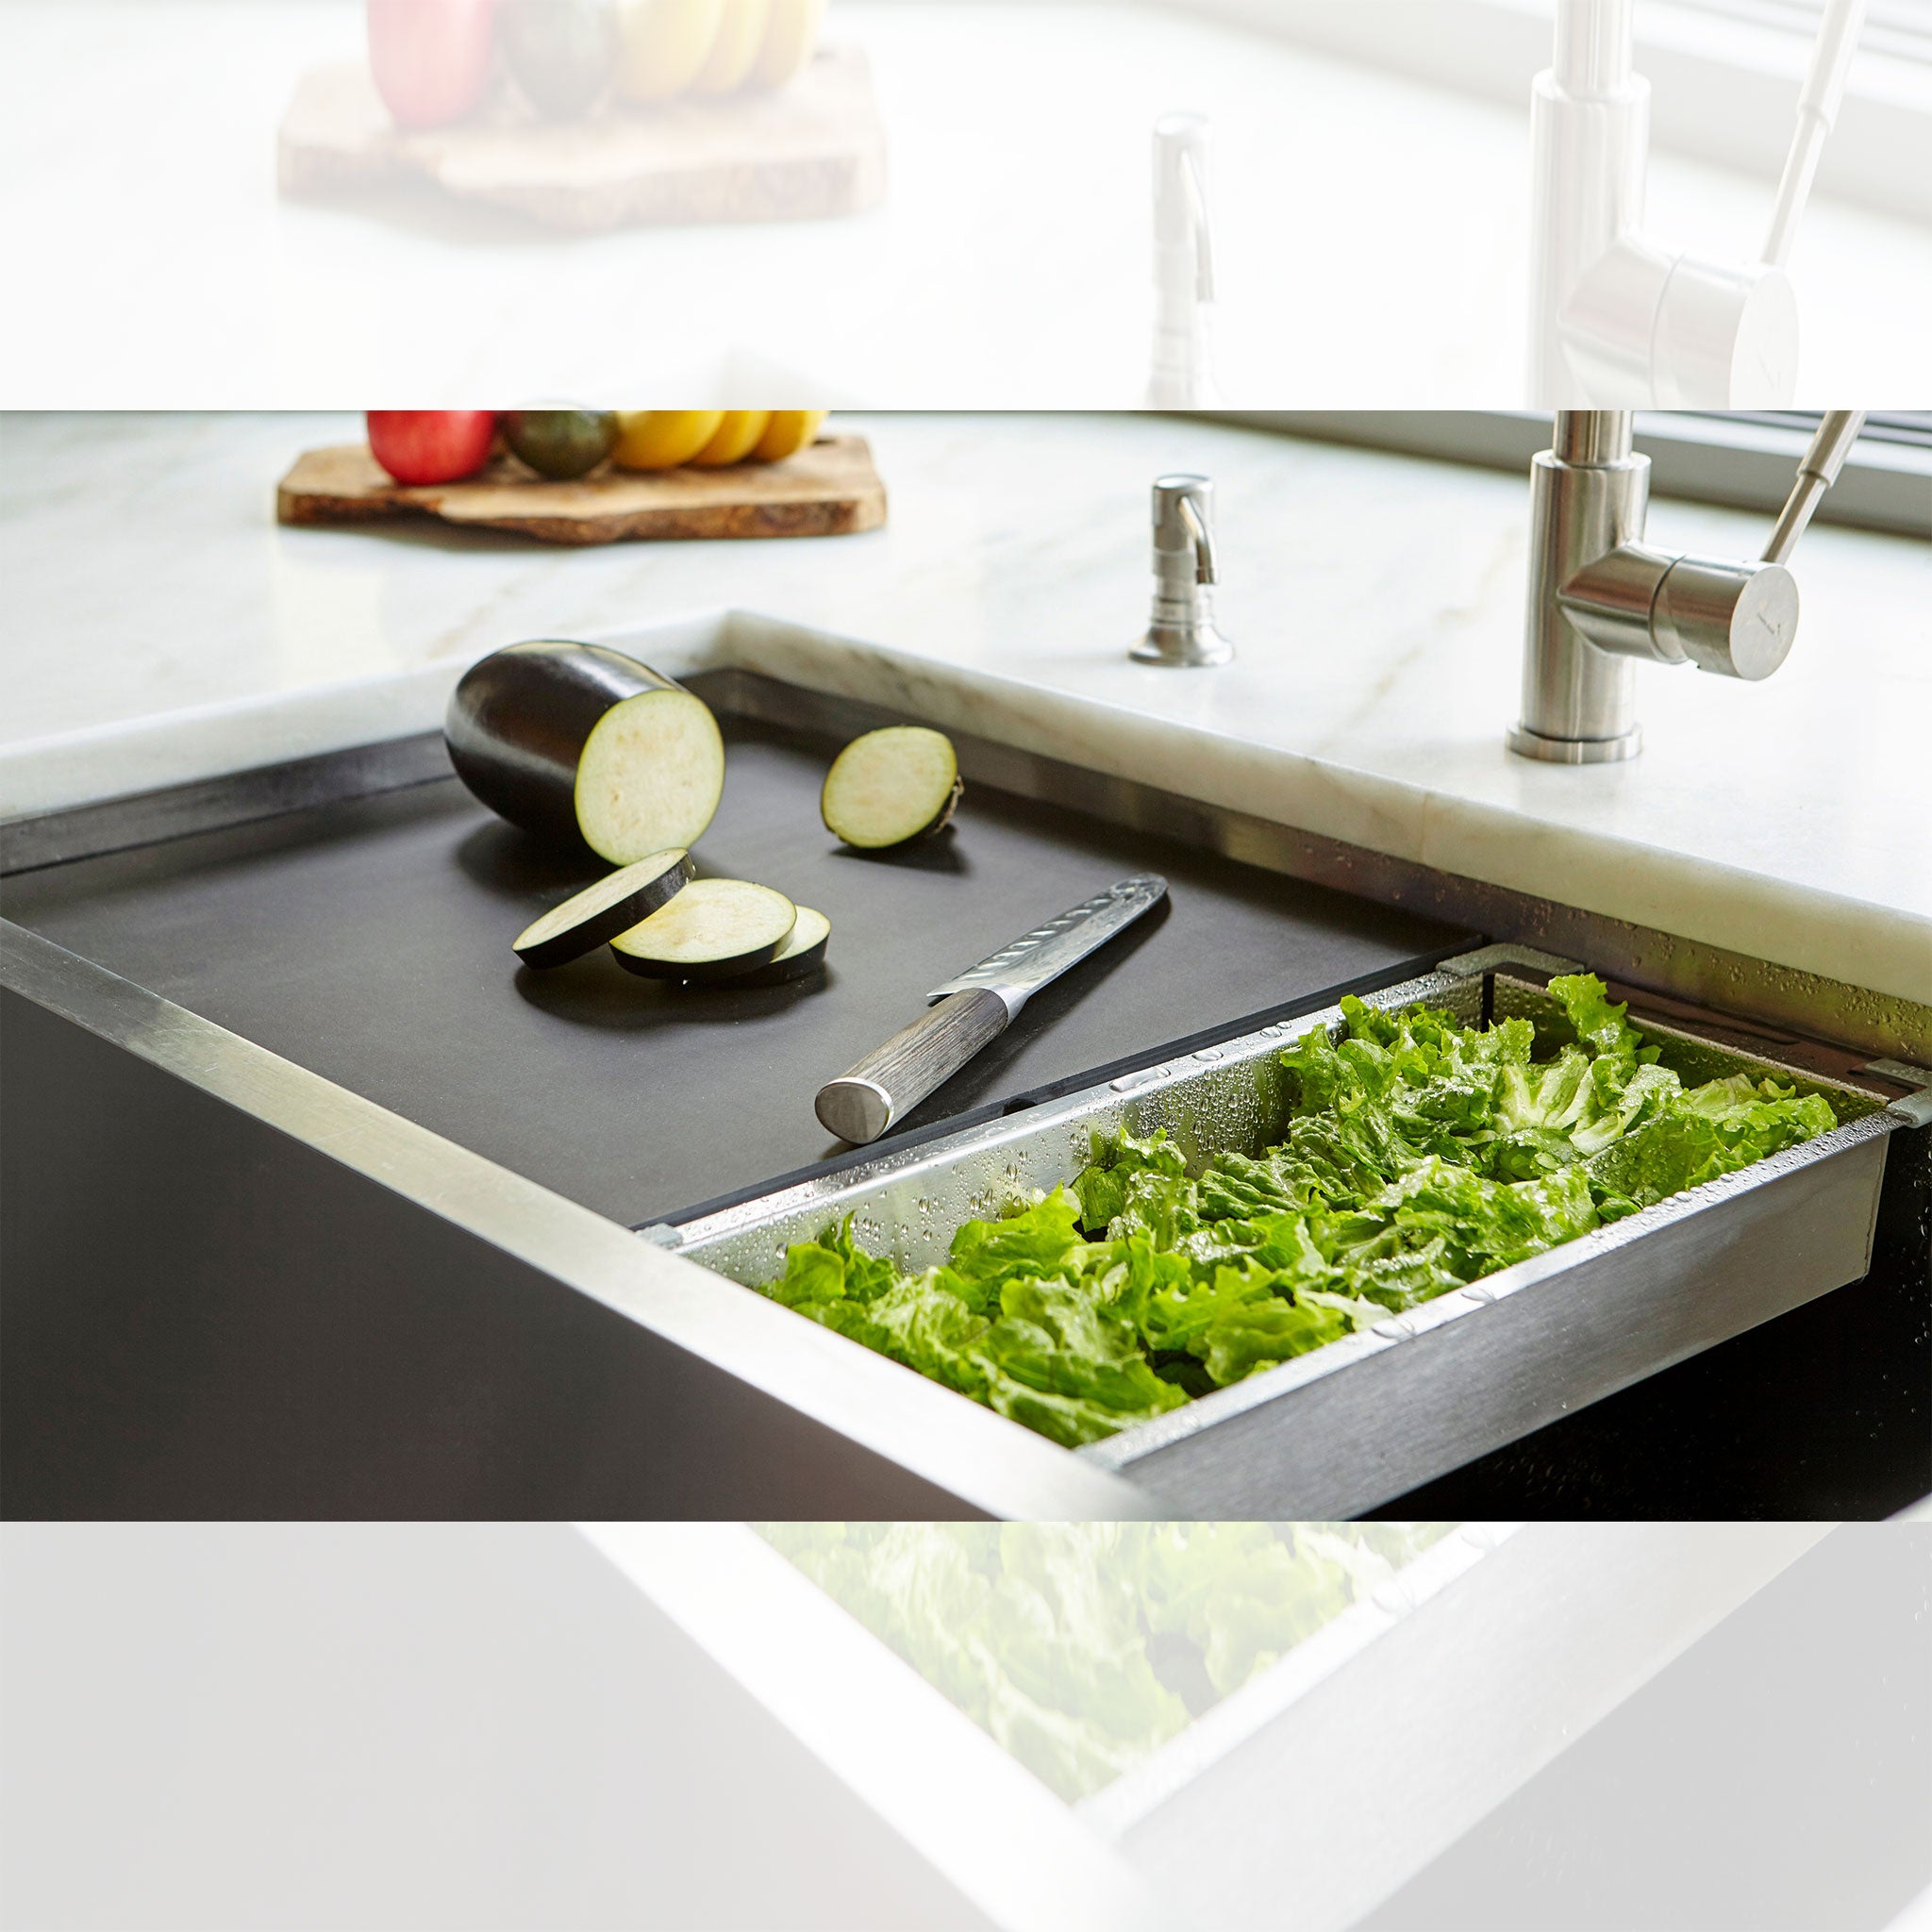 The 18”, black, dishwasher safe cutting board and stainless steel colander from Create Good Sinks.